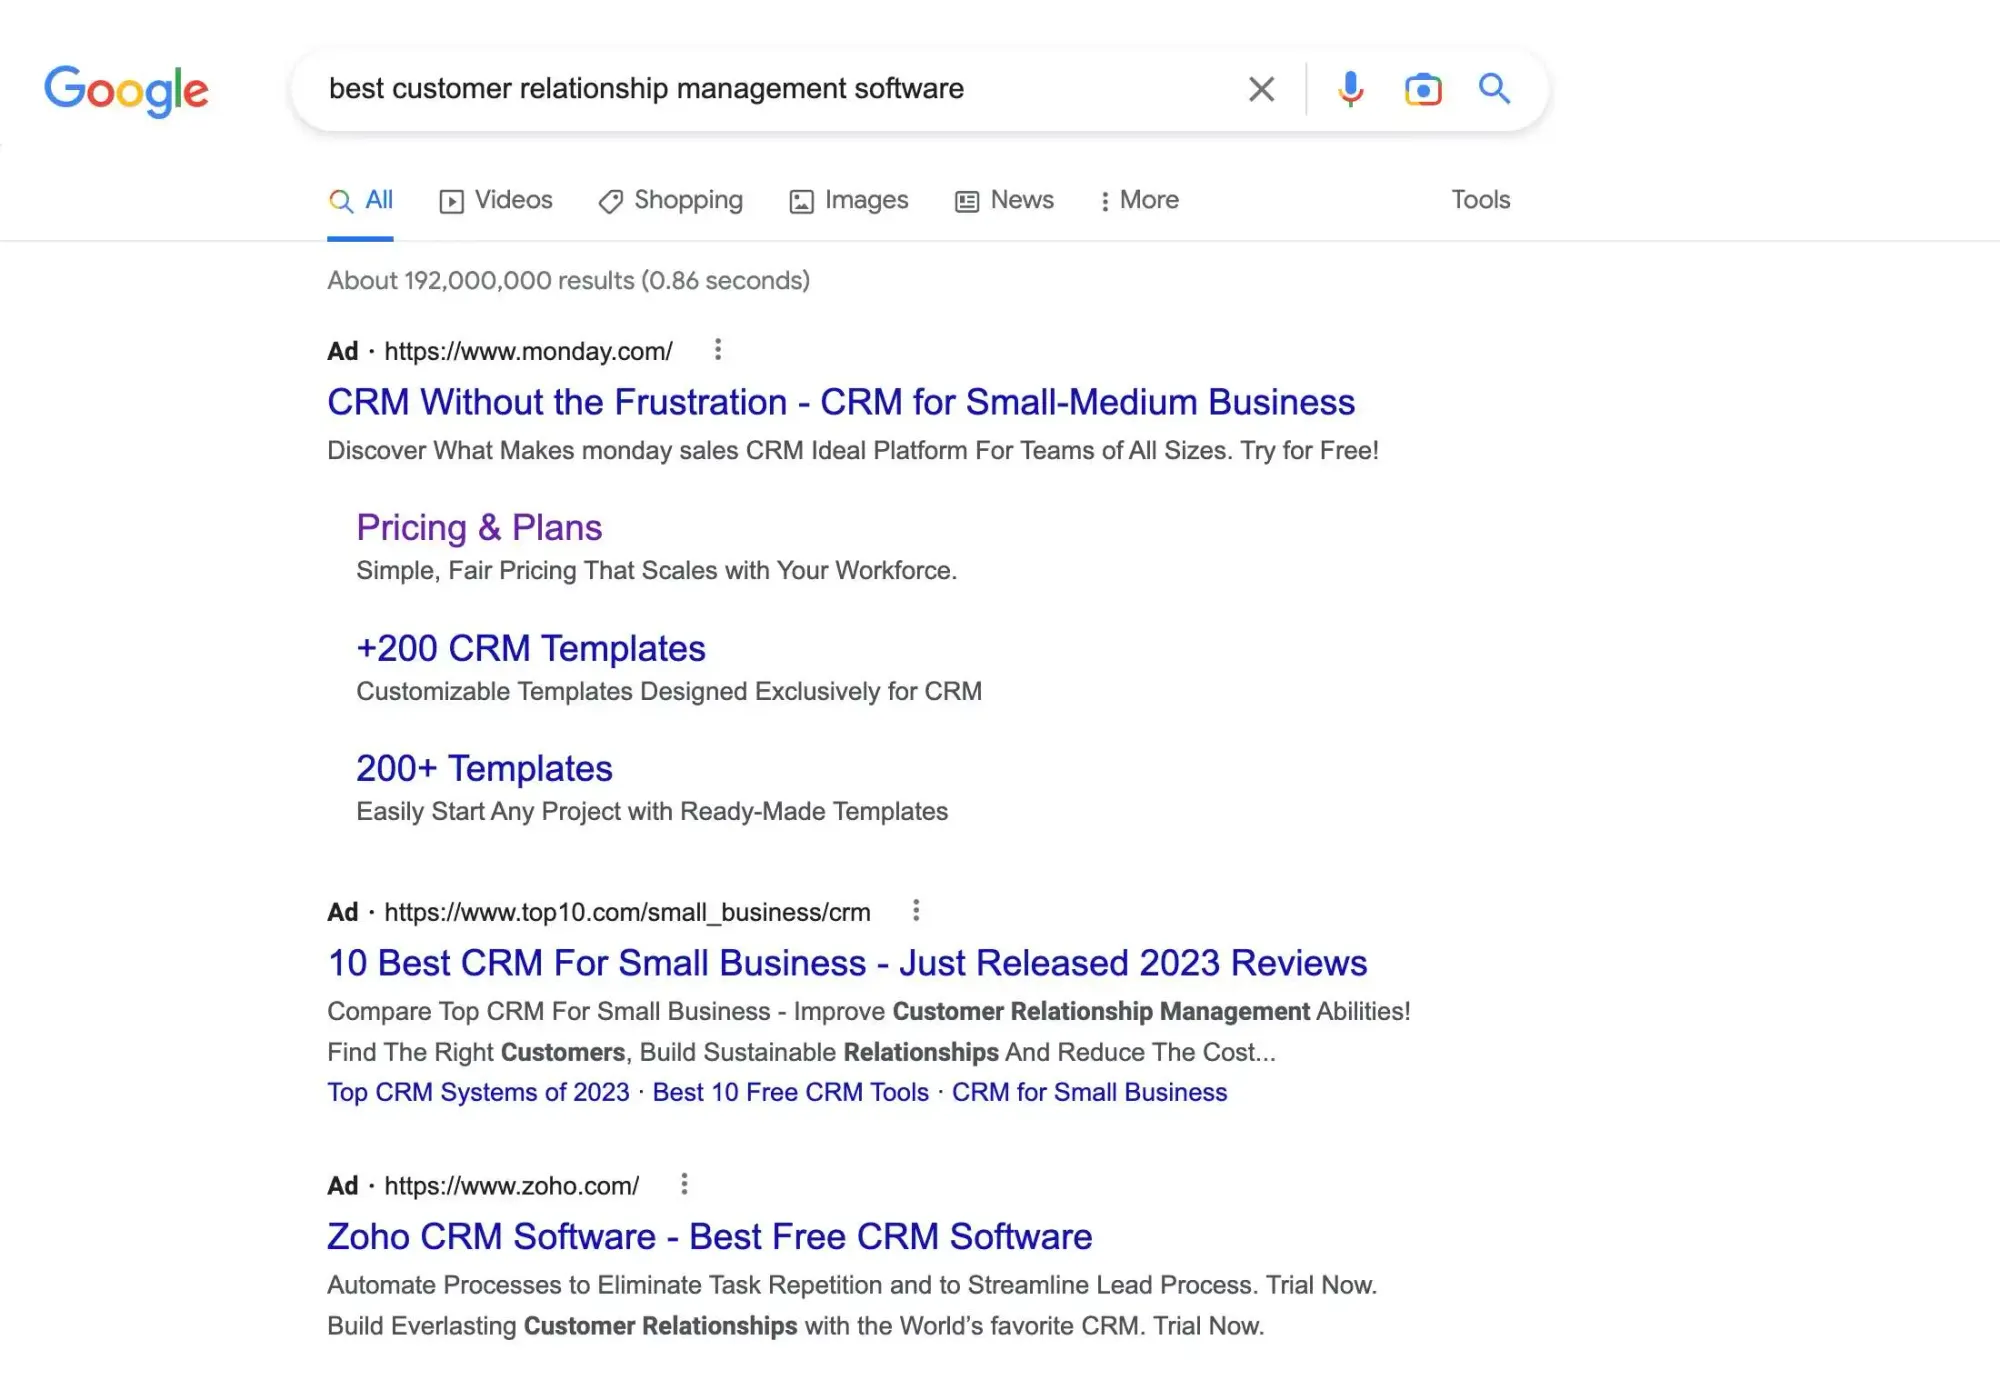 Paid search results for "best CRM software"